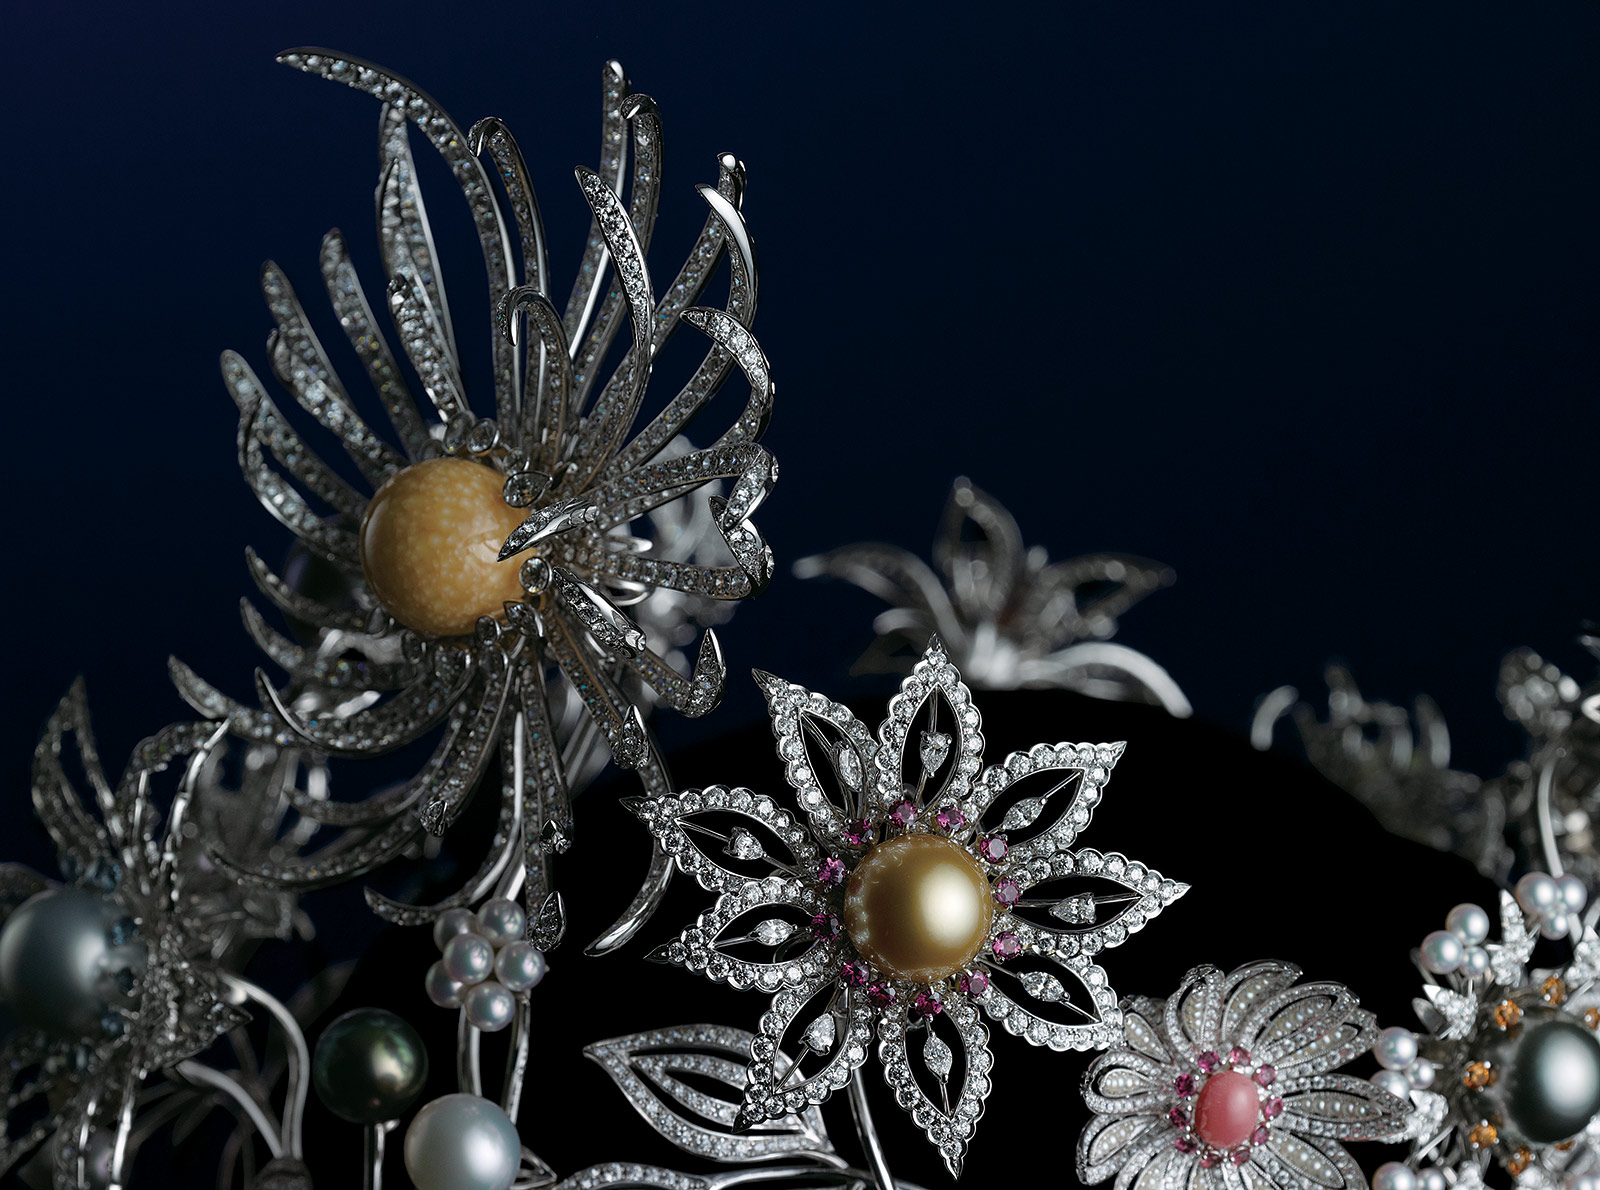 The Mikimoto Dreams & Pearls crown contains diamonds and coloured gemstones, alongside rare golden, conch and melo pearls